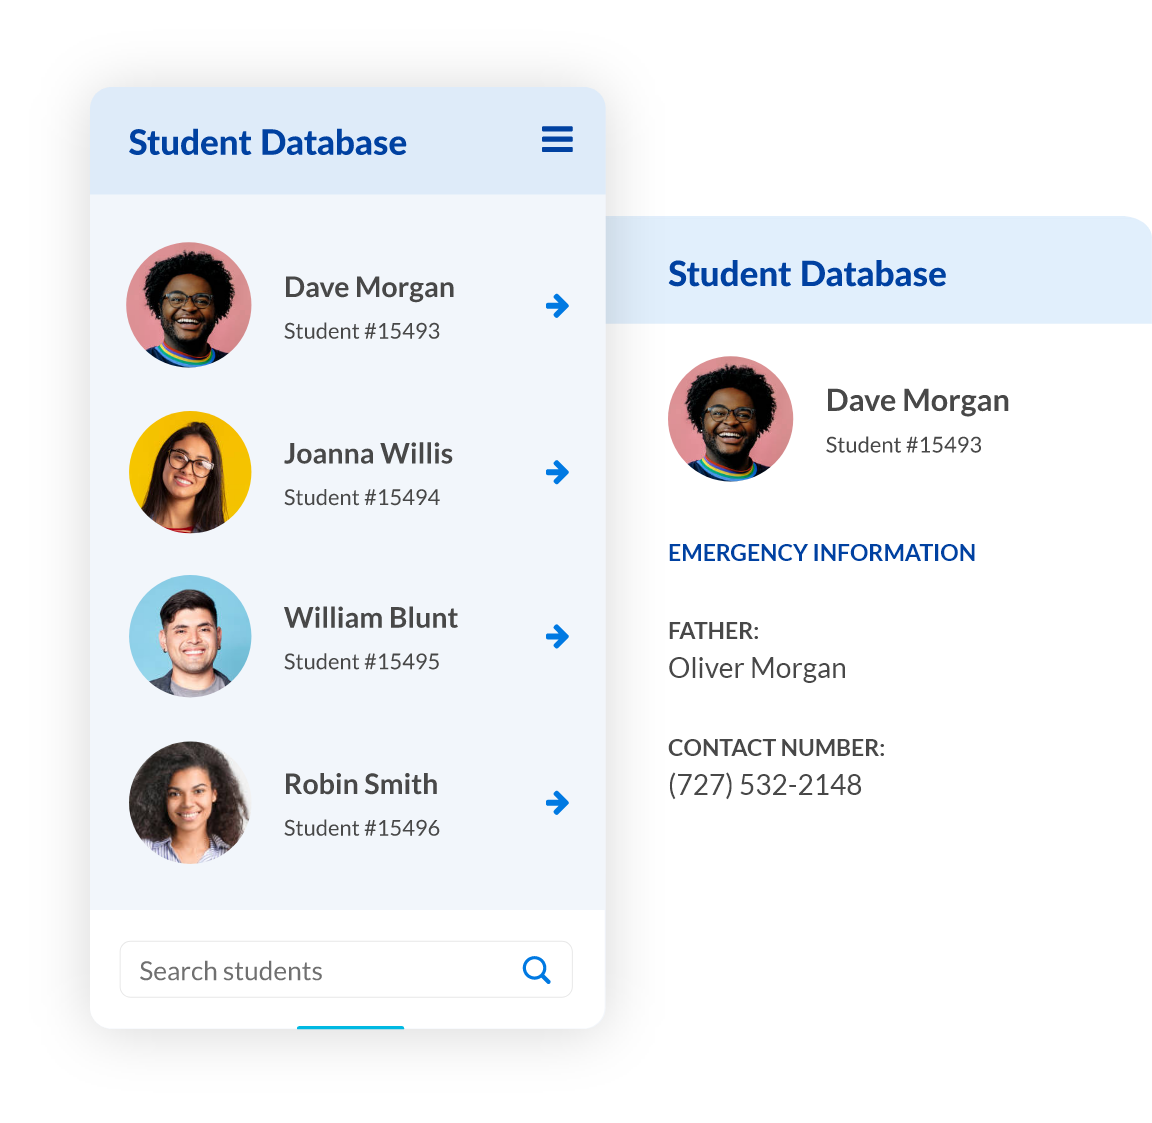 Student Database mobile application screens